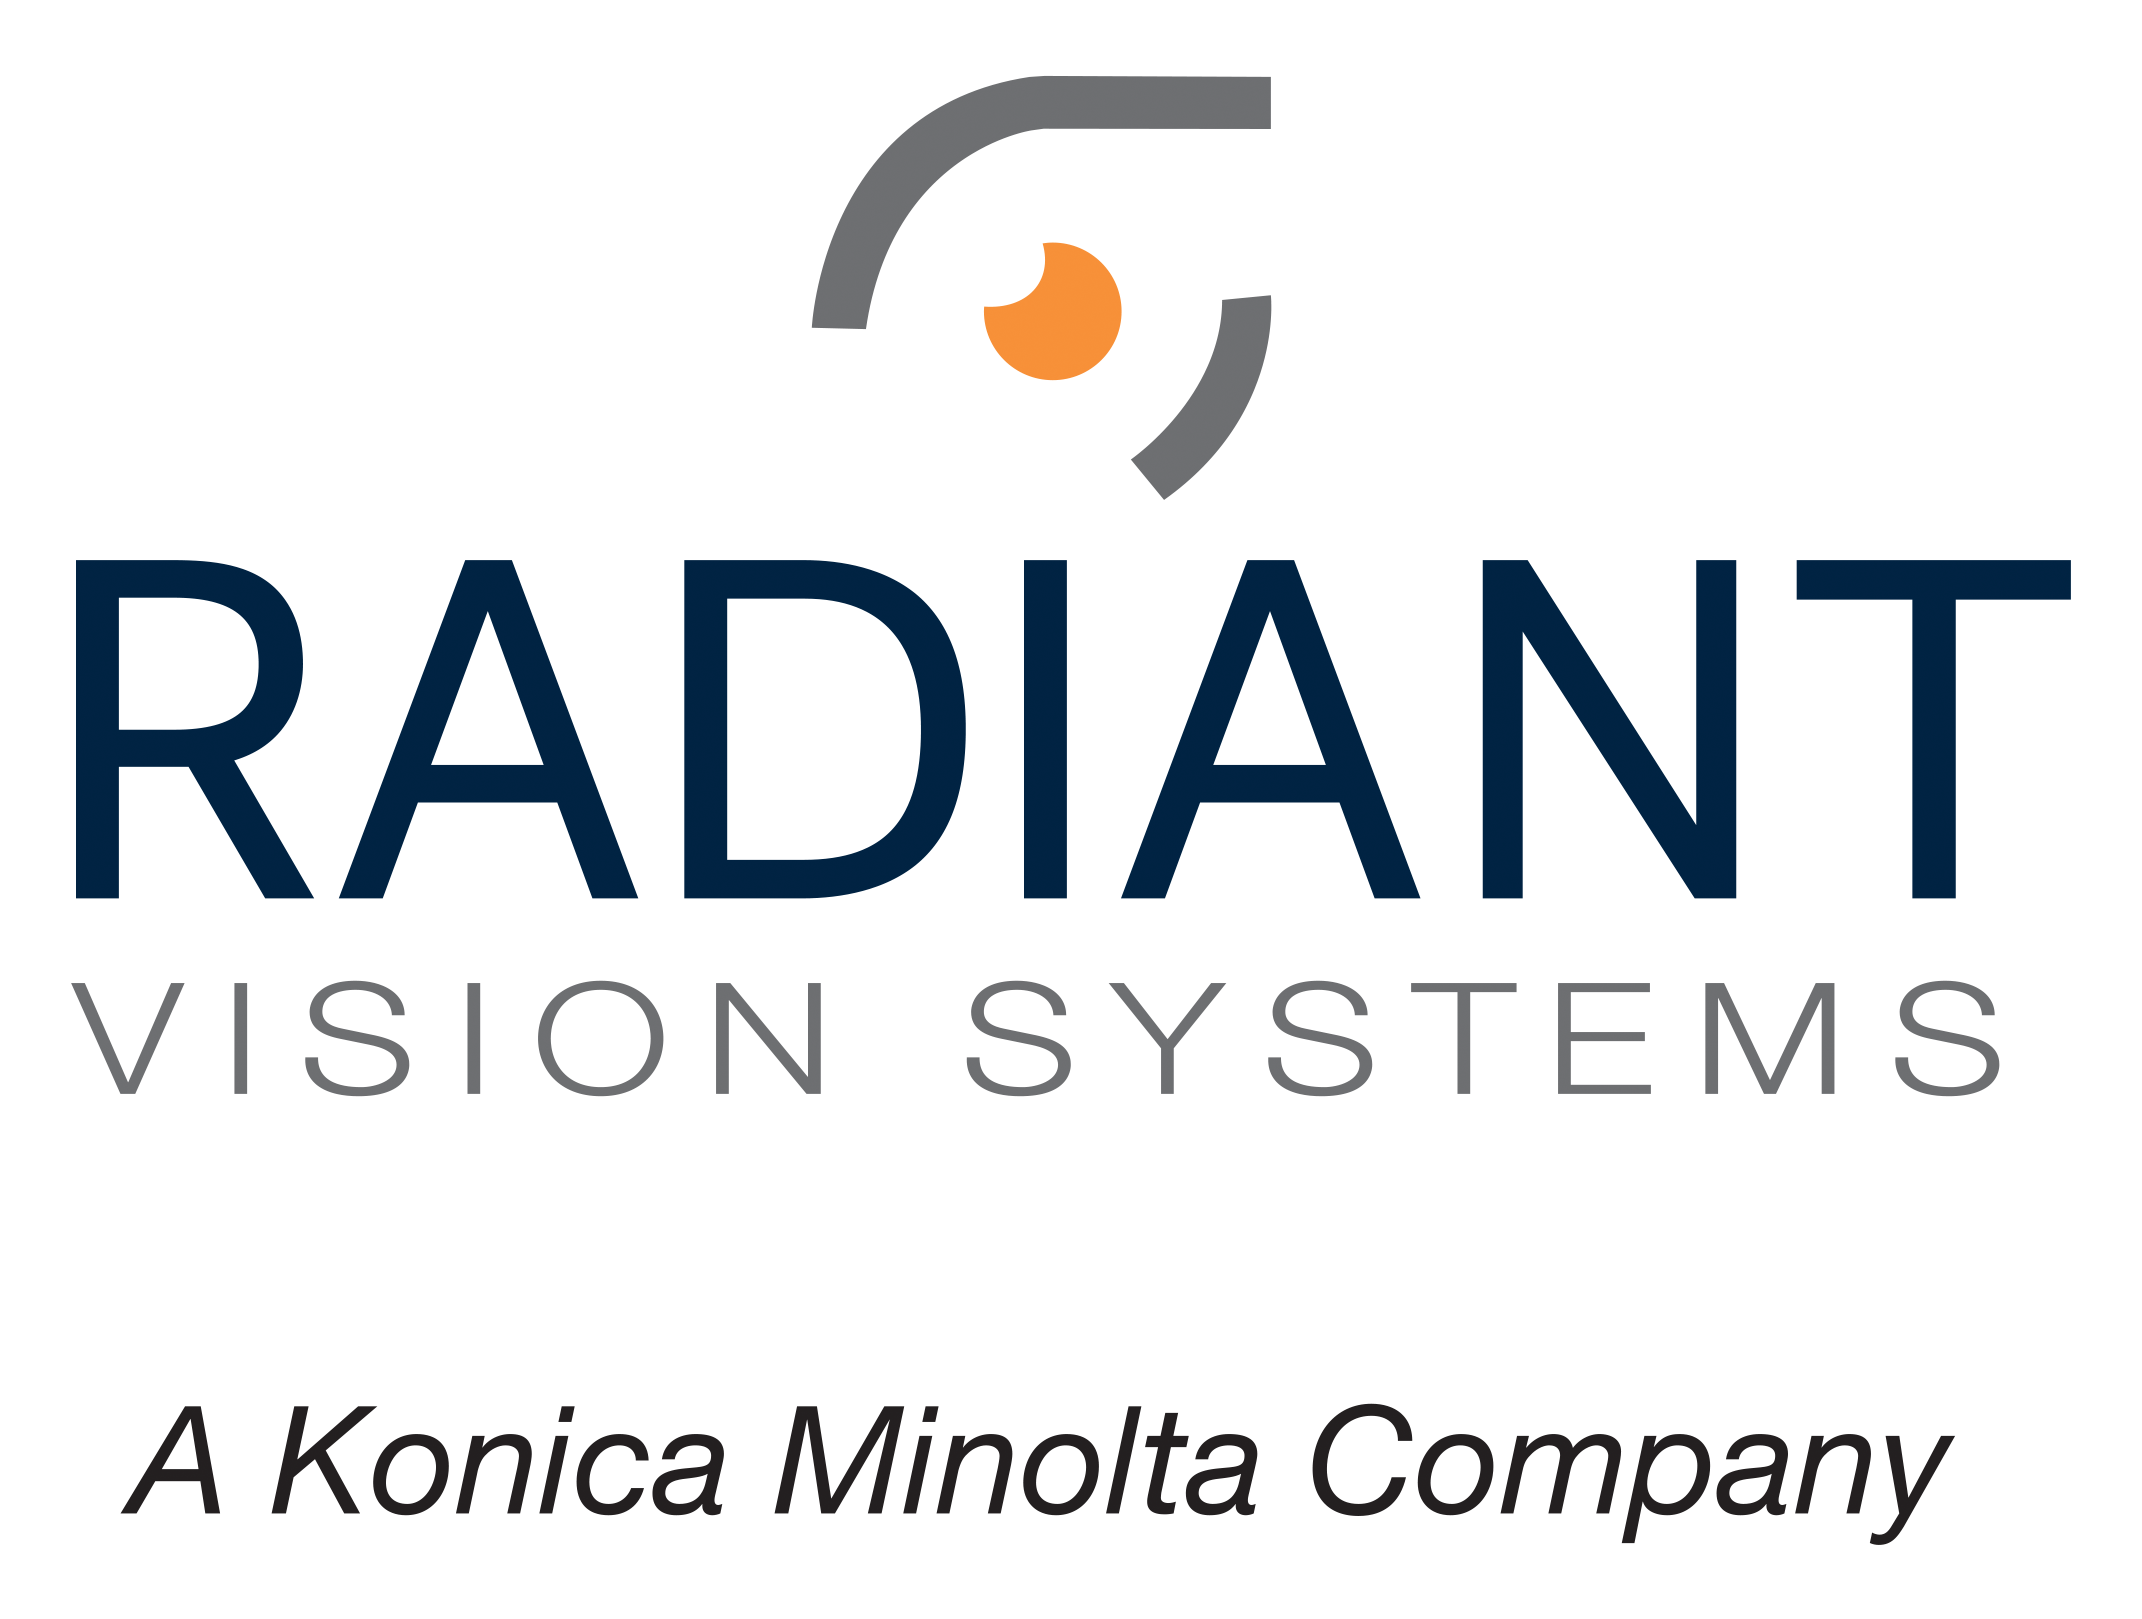 Vision systems